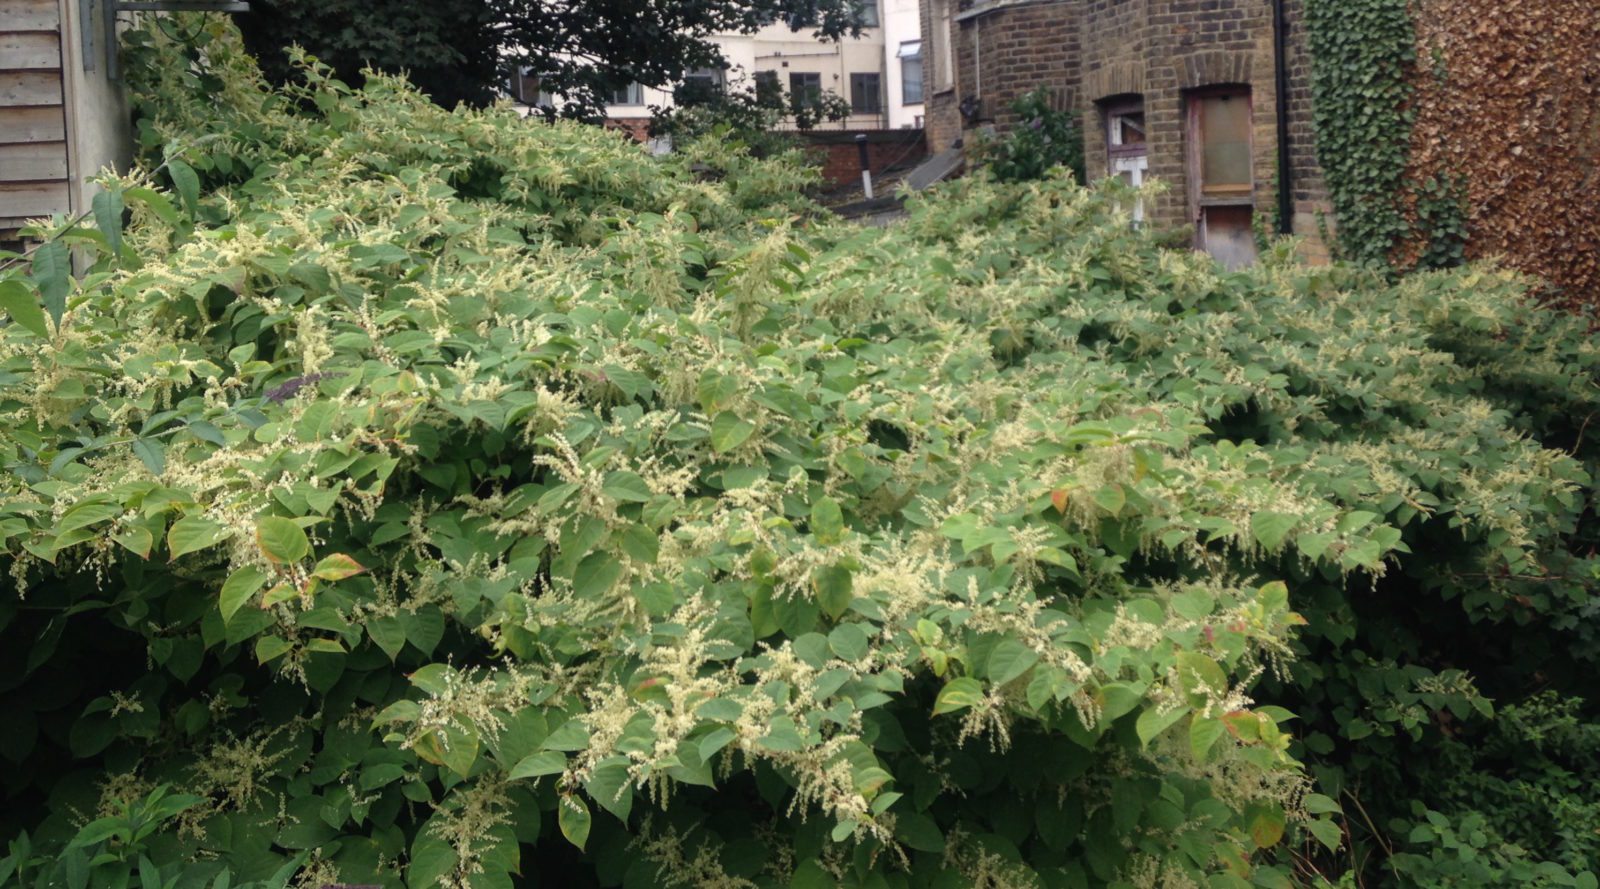 With over 25 years’ experience in our field, TCM continue to be a market leader in Japanese Knotweed eradication throughout the UK and the Republic of Ireland.